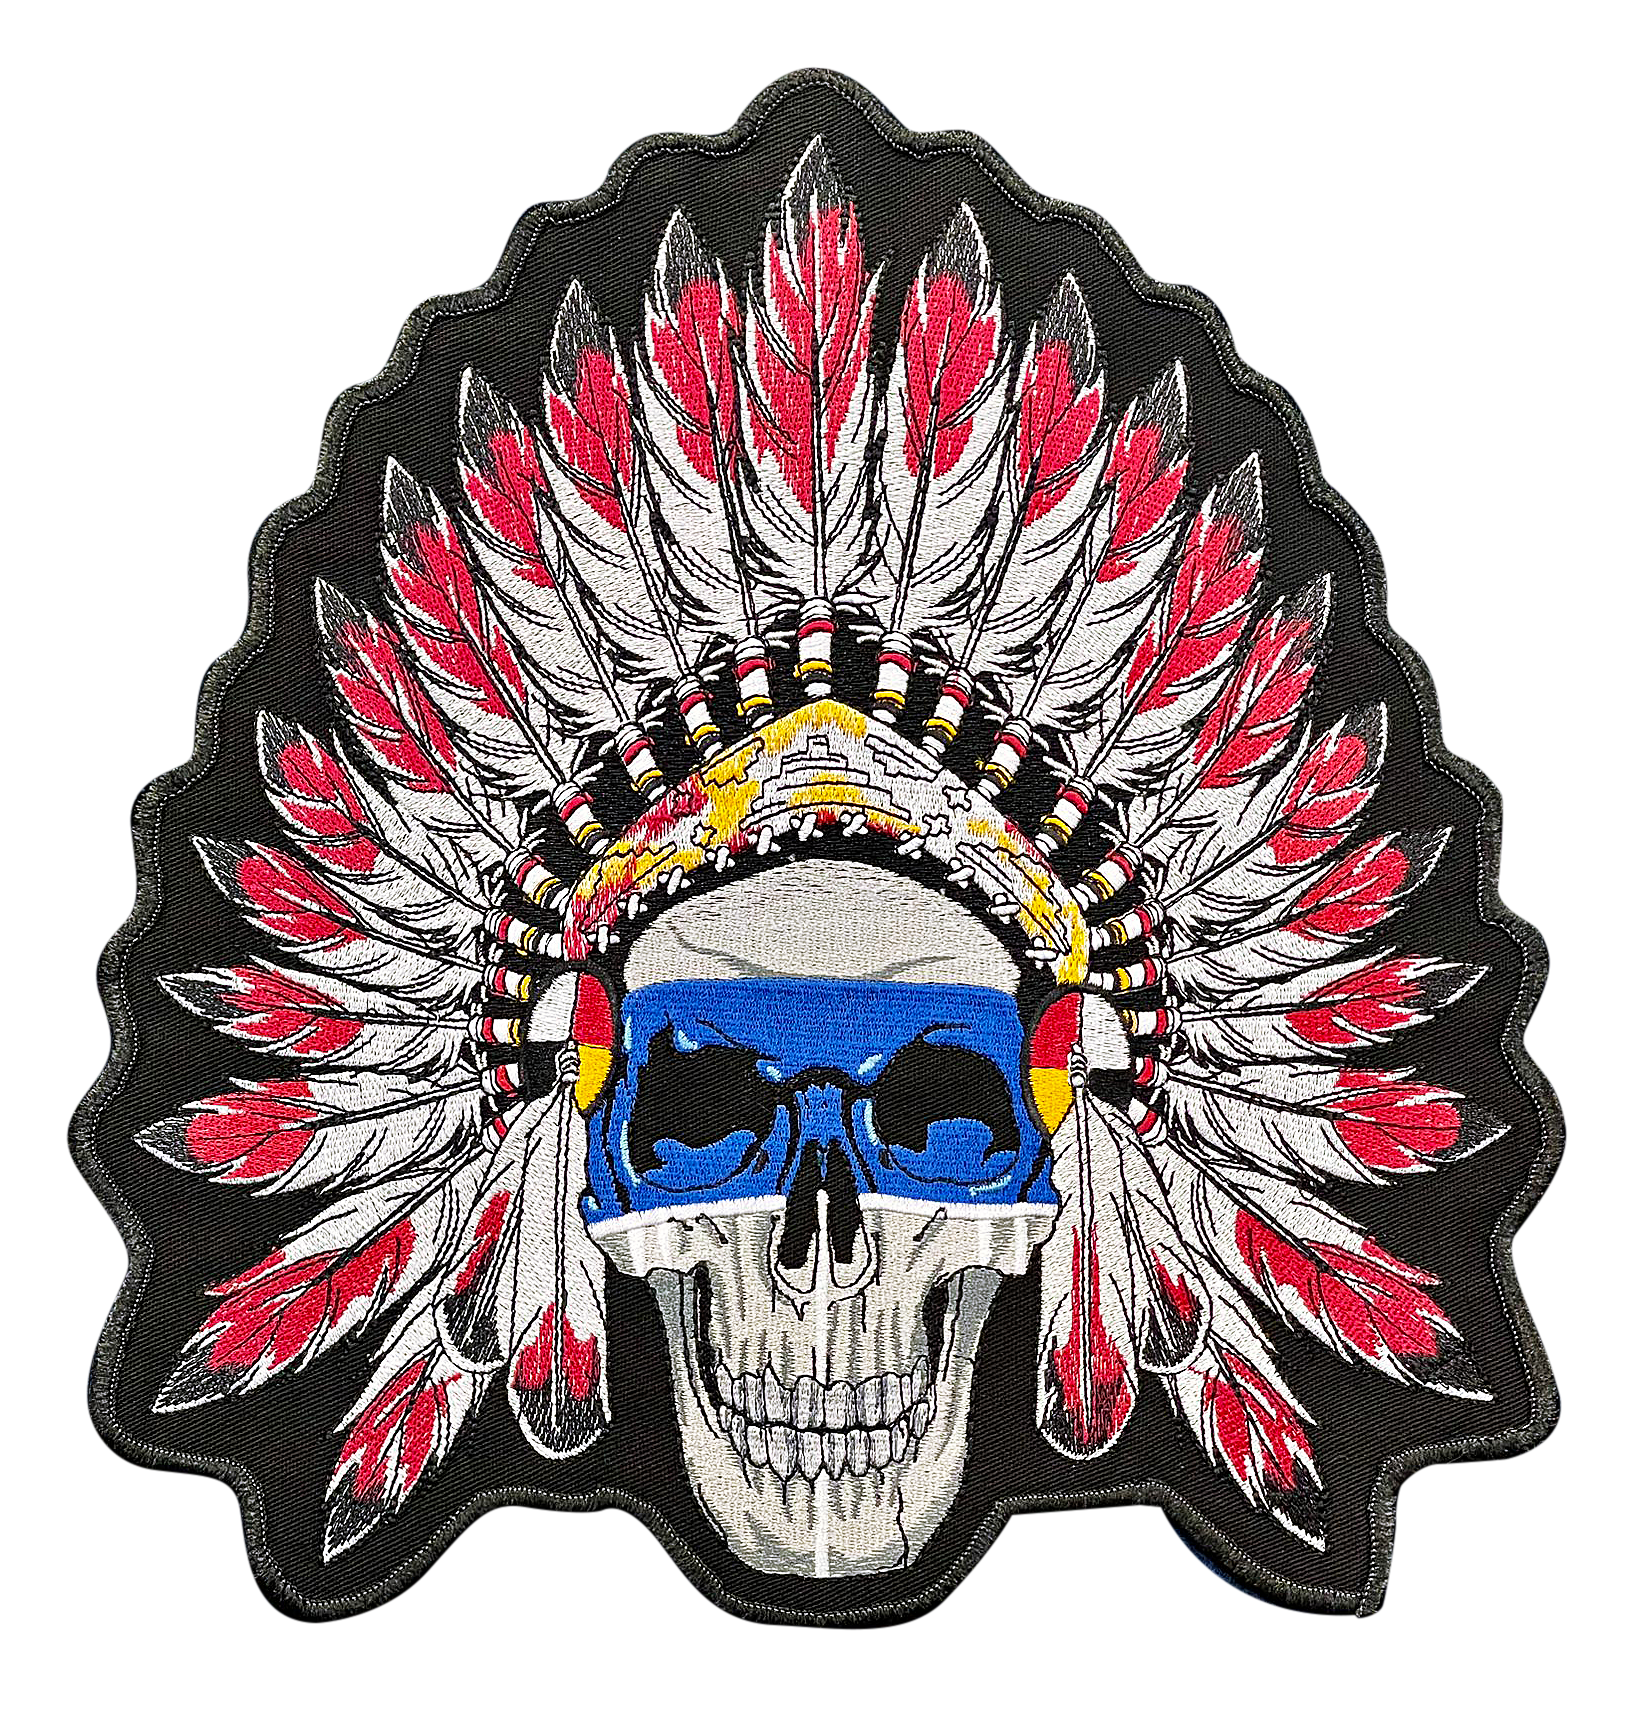 A patch with a skull wearing a native american headdress.